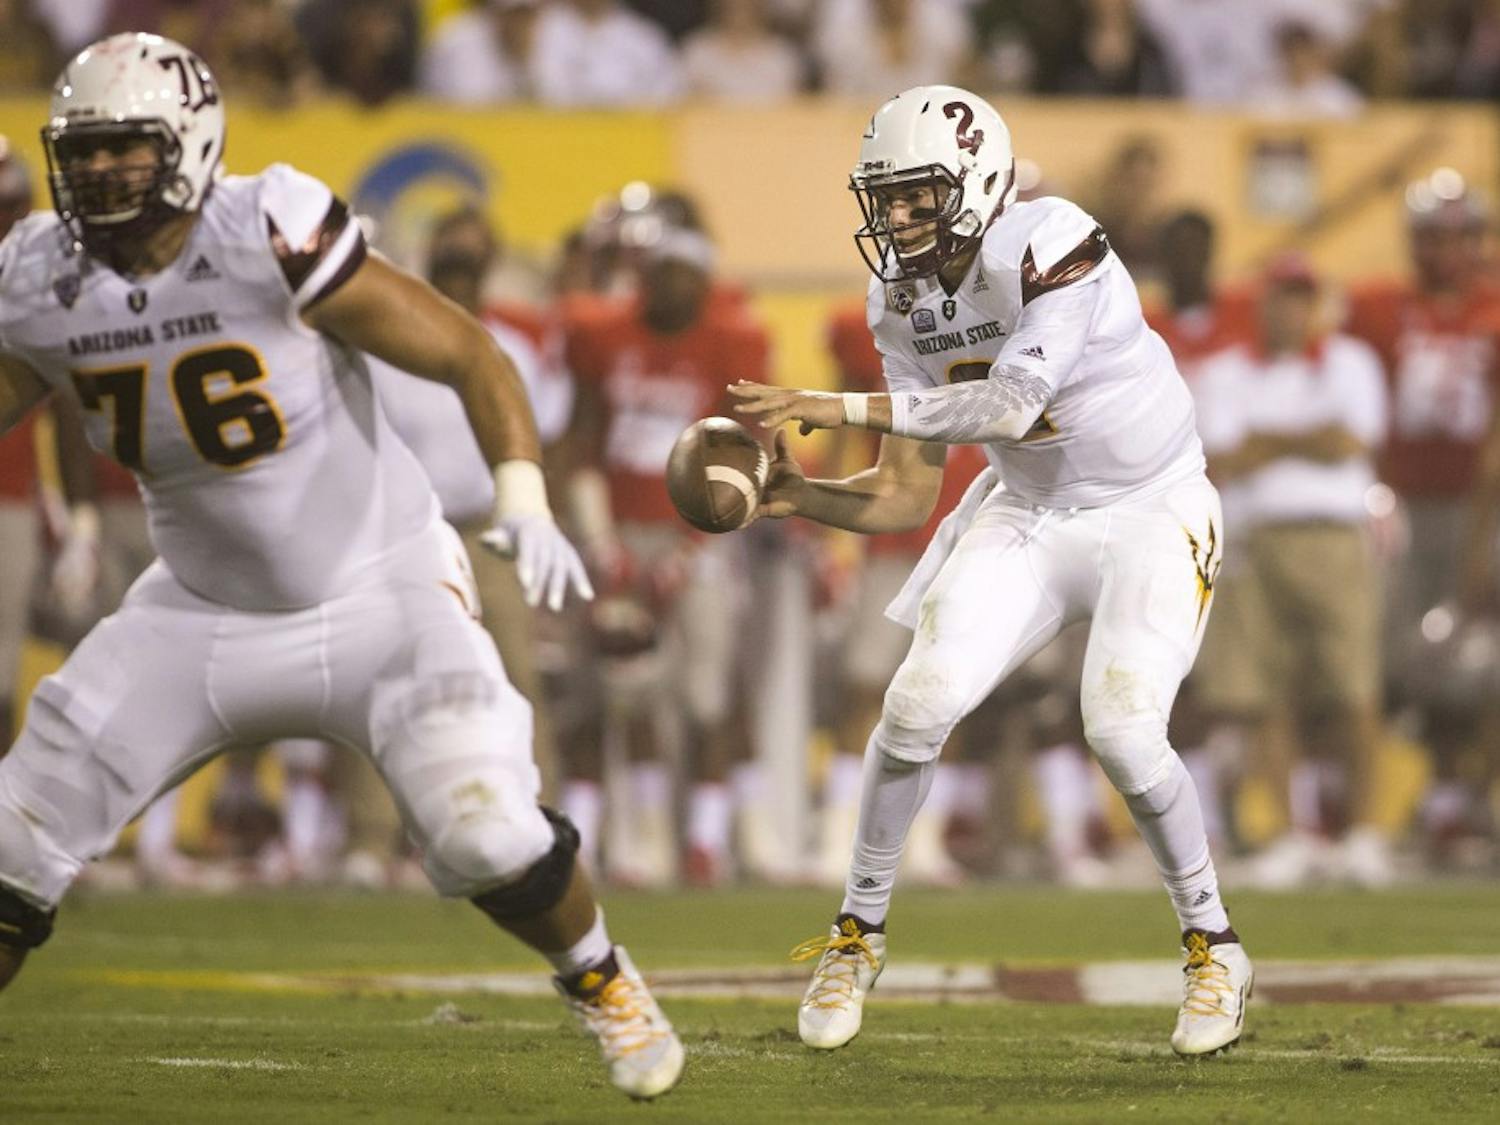 Redshirt senior quarterback Mike Bercovici takes a snap against New Mexico on Friday, Sept. 18, 2015, at Sun Devil Stadium in Tempe.